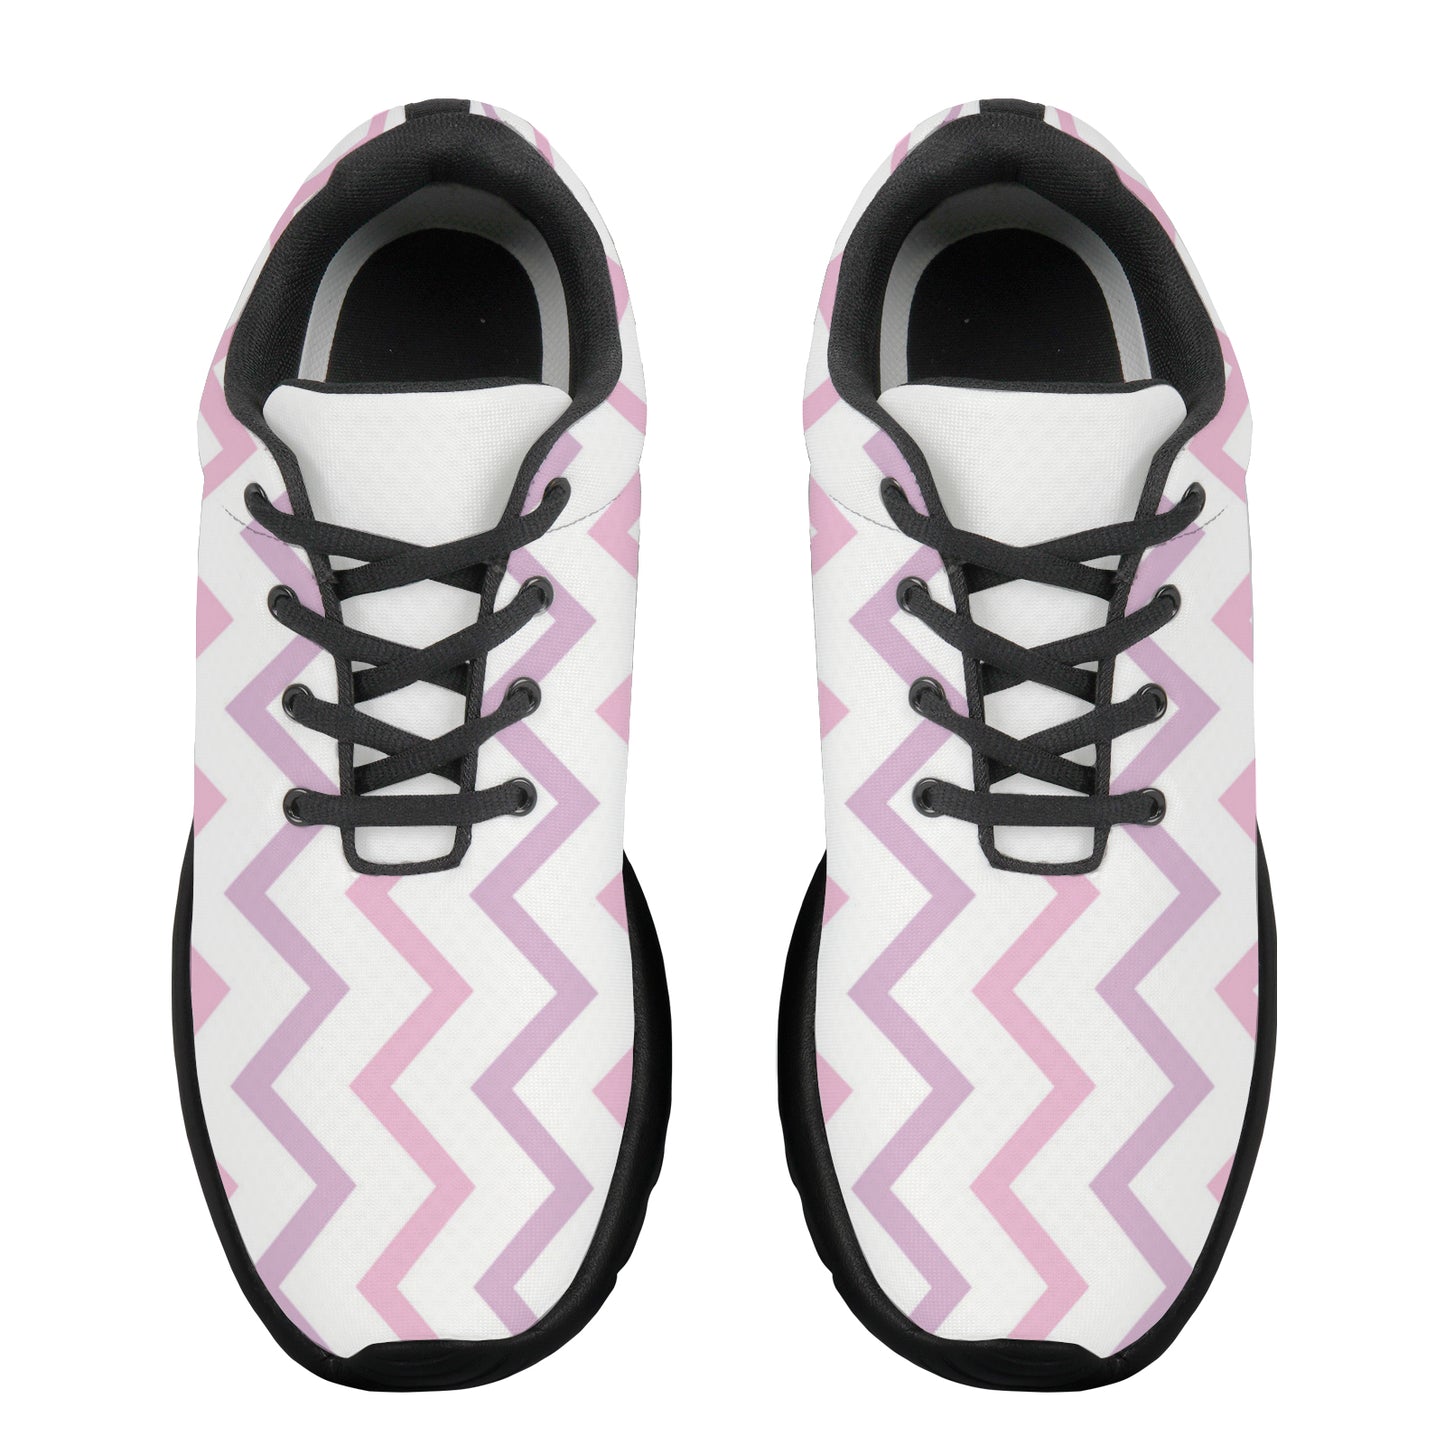 Women's Athletic Shoes - Purple/Pink Combo